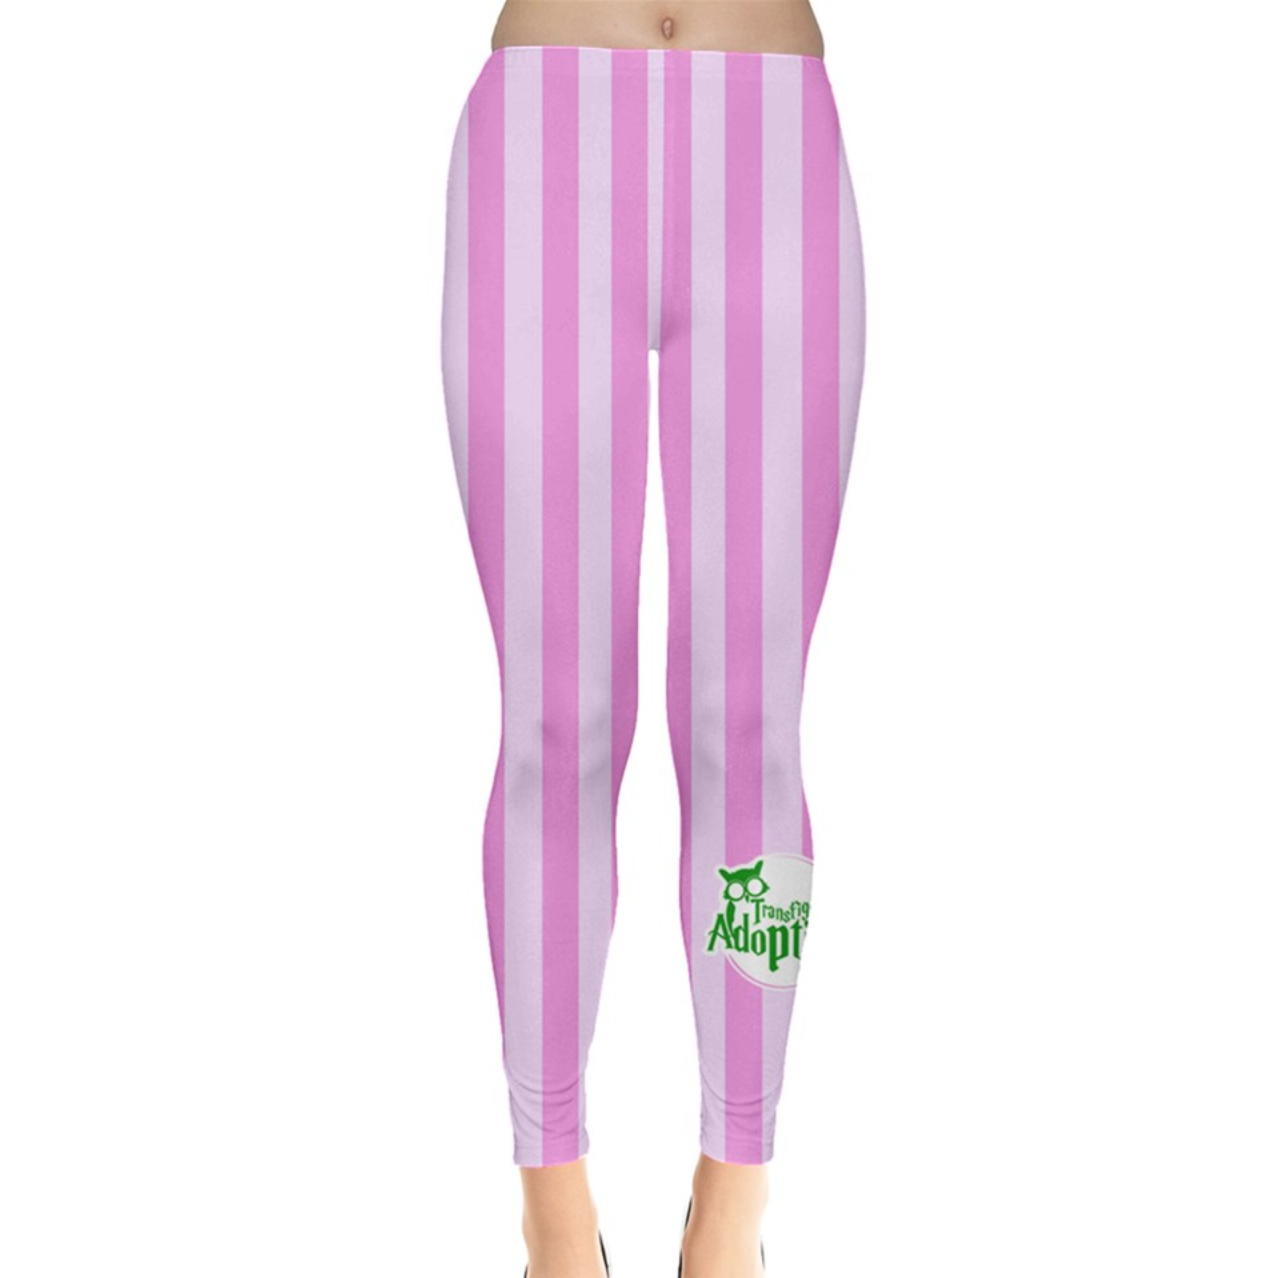 Candy Store Leggings (Pink Stripes)